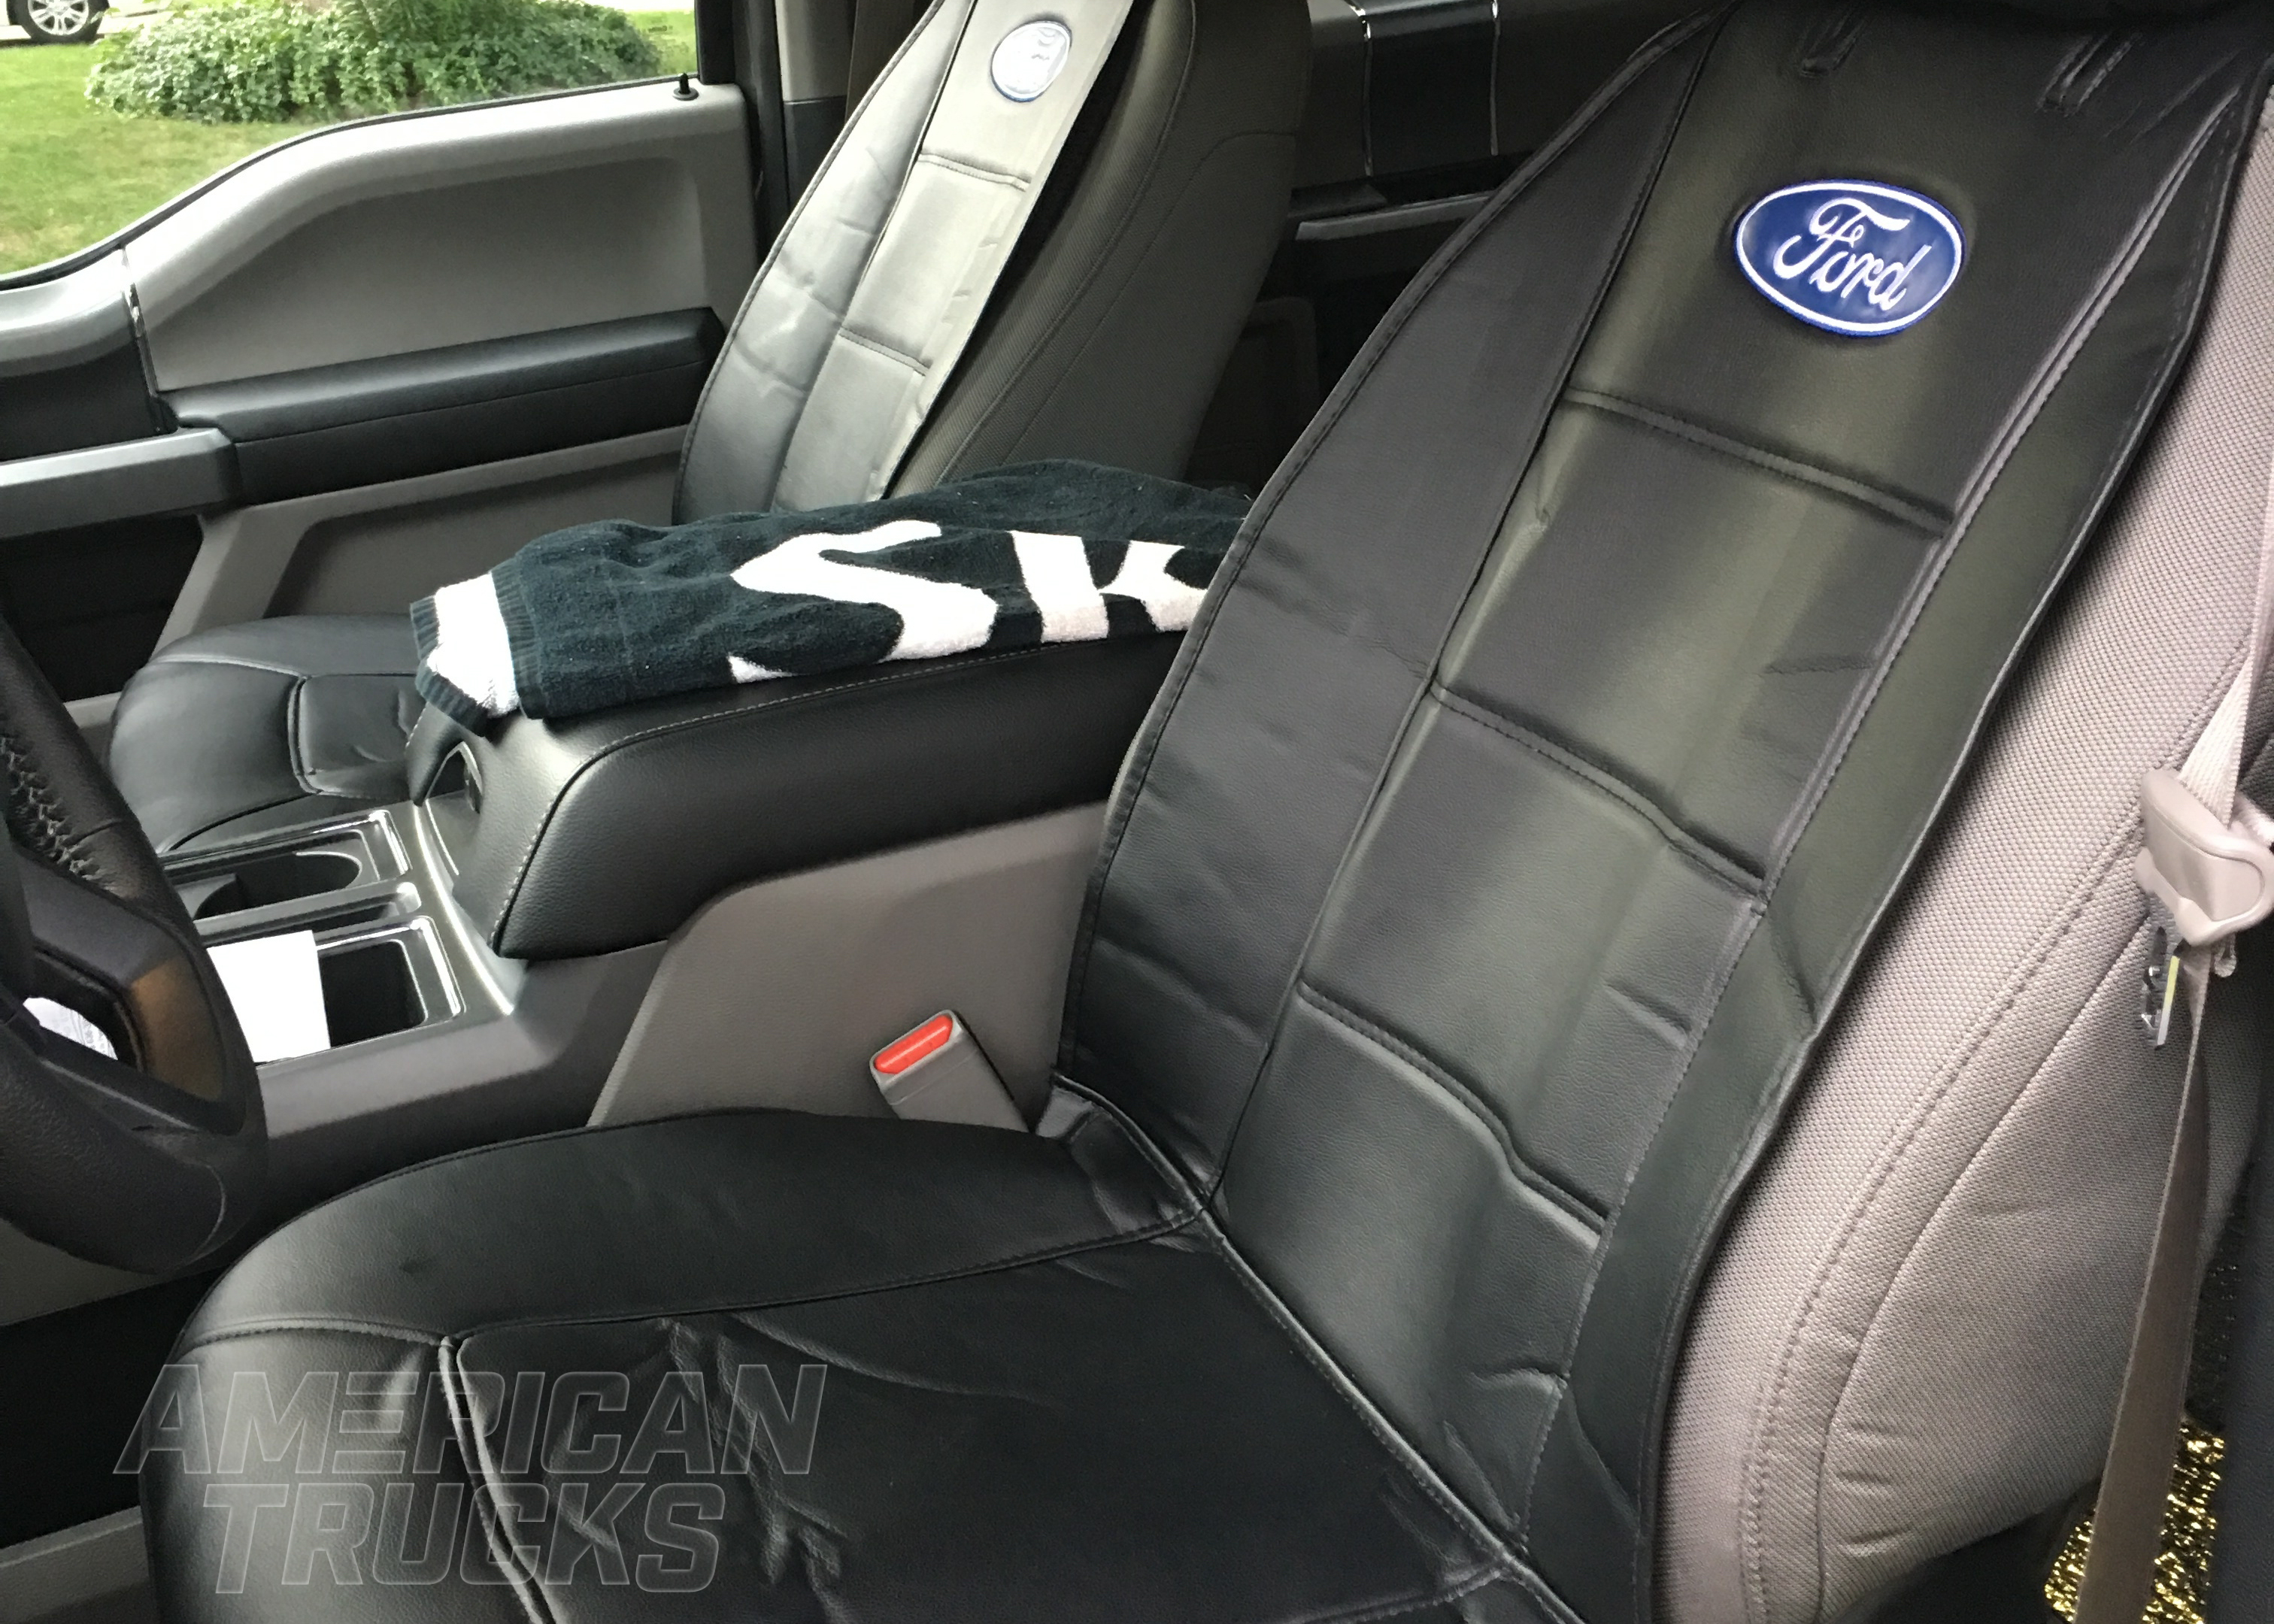 2016 3.5L EcoBoost F150 Featuring Ford Seat Covers